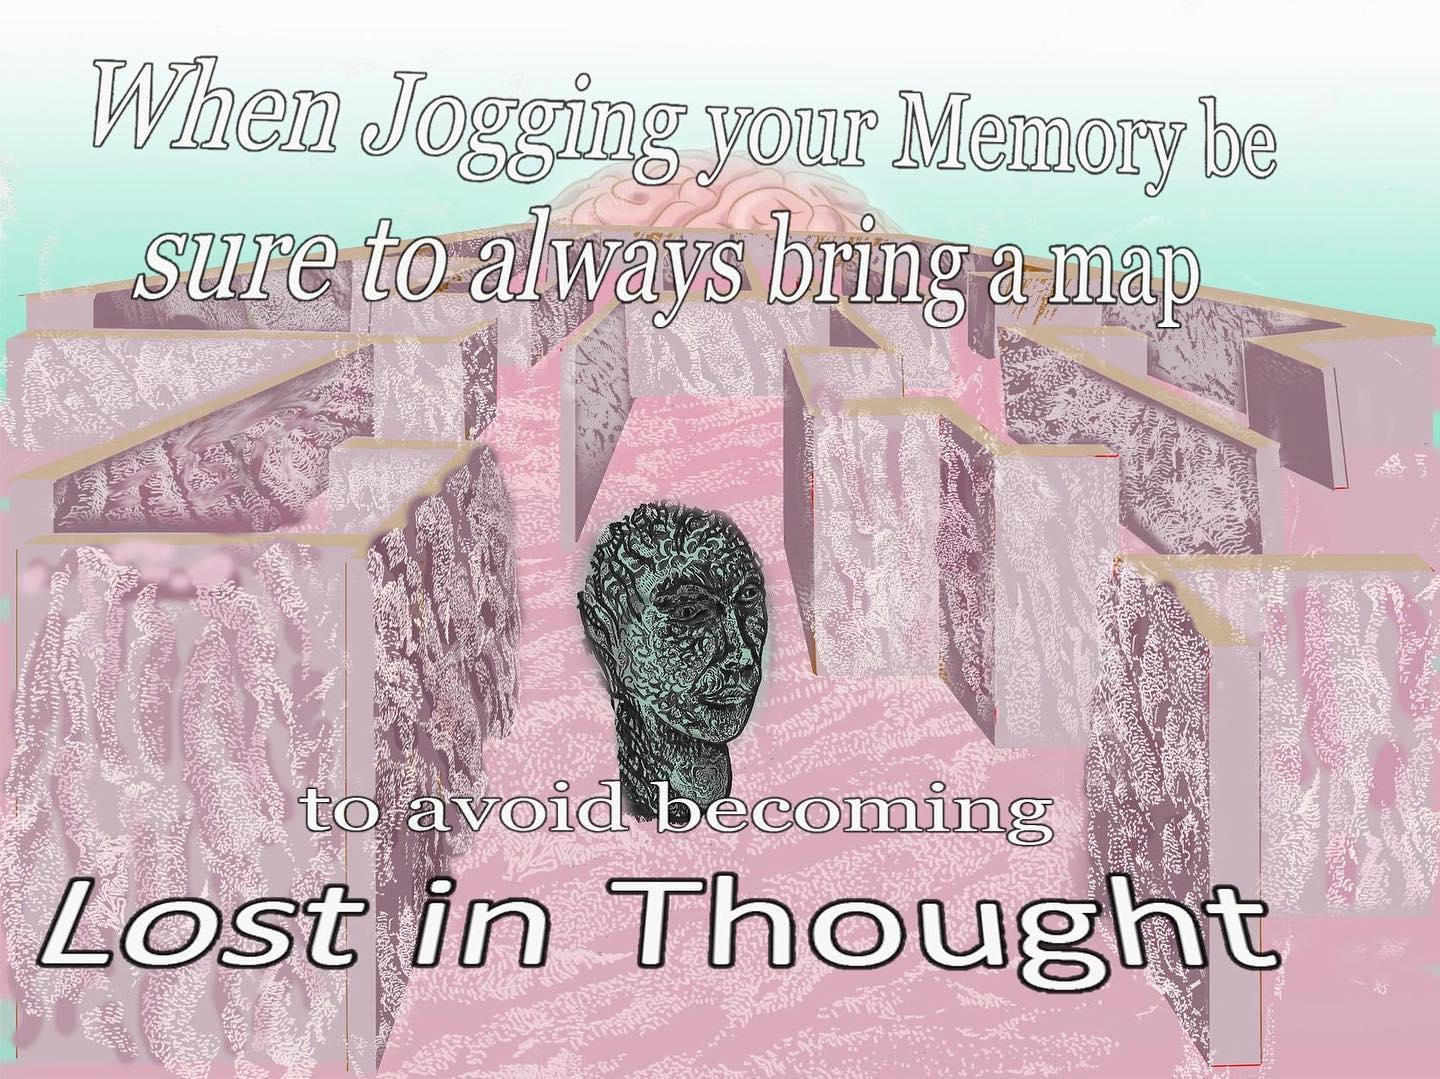 dank memes - material - Whem Jogging your Memory be sure to always bring a map to avoid becoming Lost in Thought